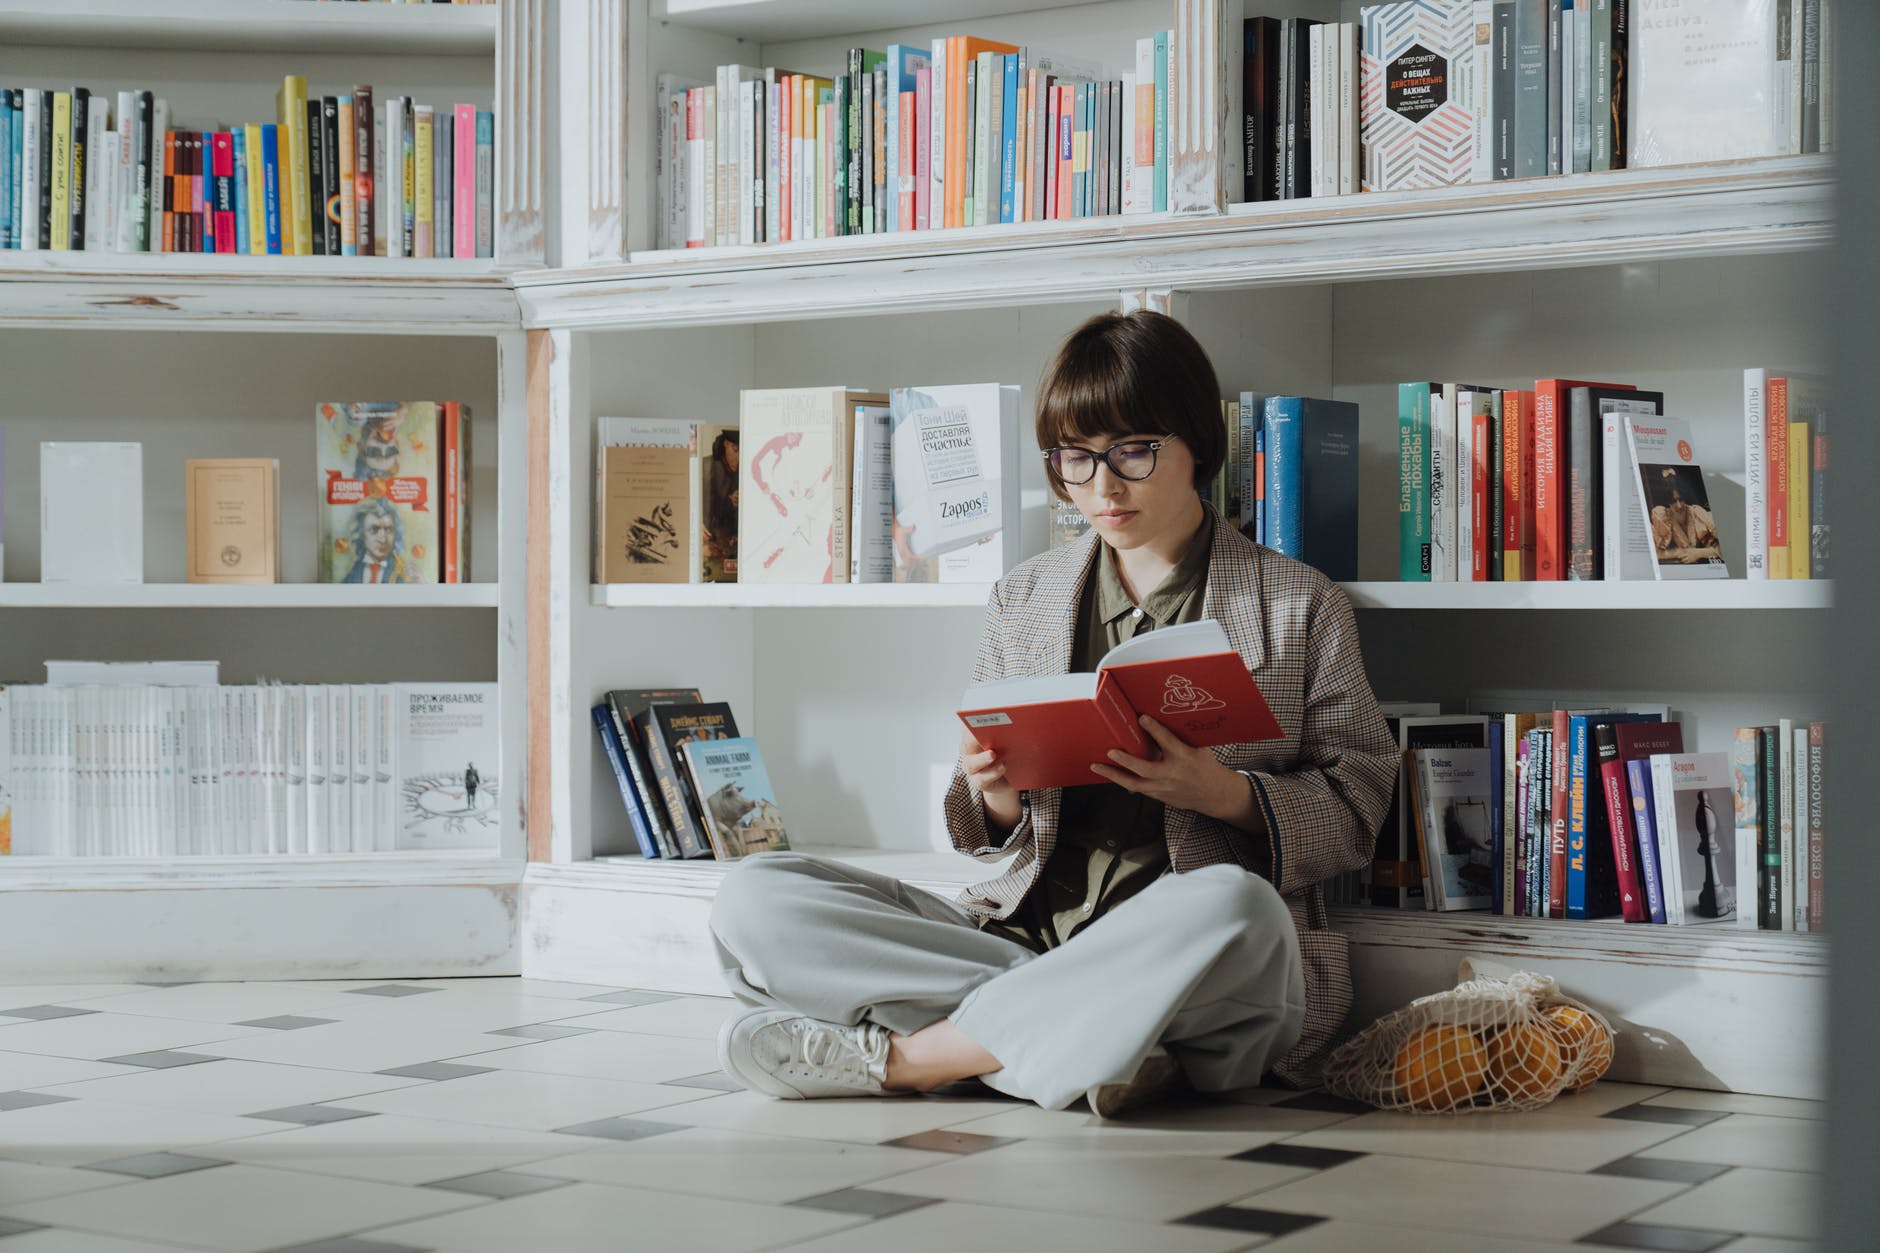 Image of a woman reading, in front of neatly arranged bookshelves.
